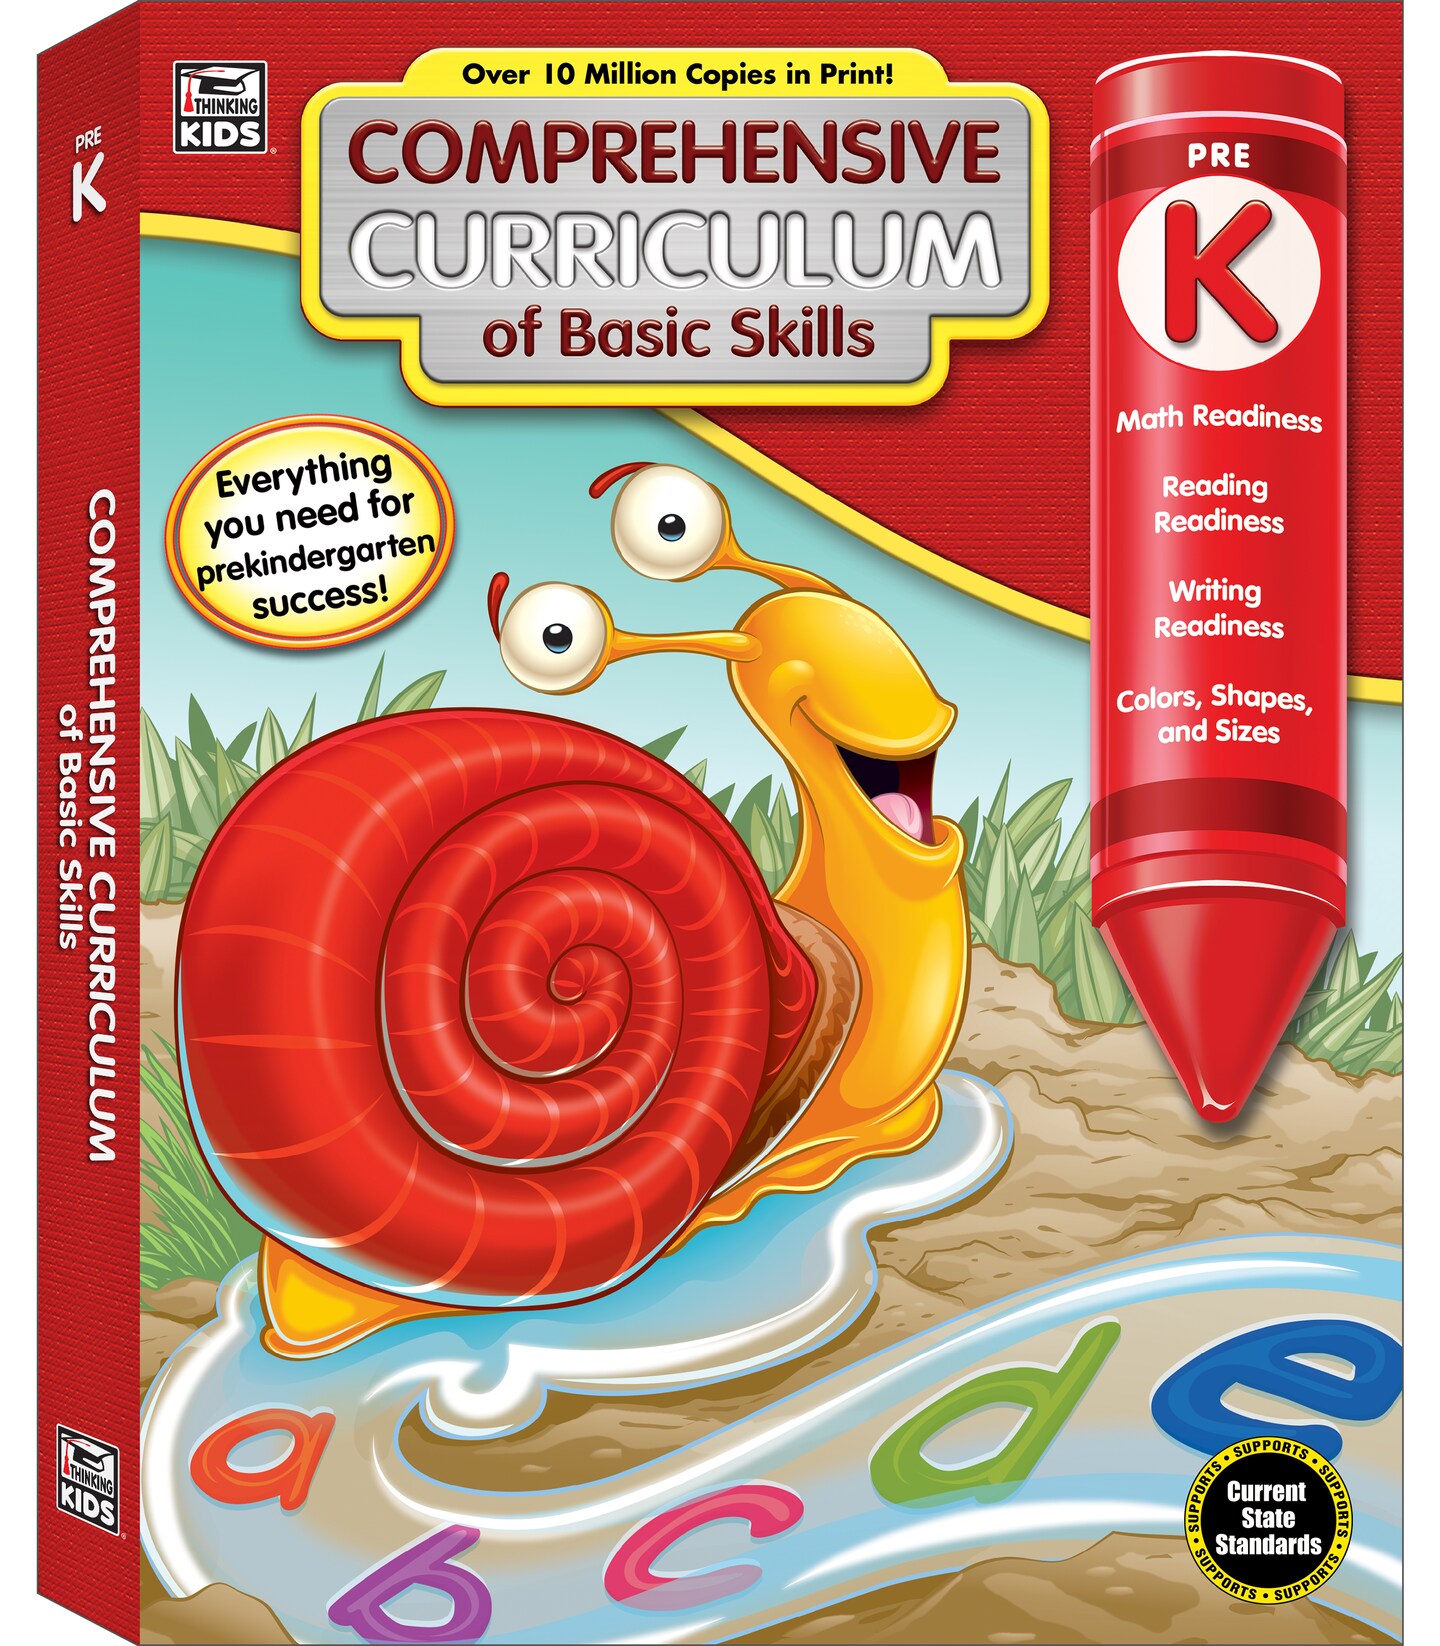 Comprehensive Curriculum of Basic Skills Preschool Workbook Age 4-5, Math, Reading Comprehension, Letter Recognition, Alphabet, Colors, Shapes, Counting and More, Pre K Workbooks (544 pgs)